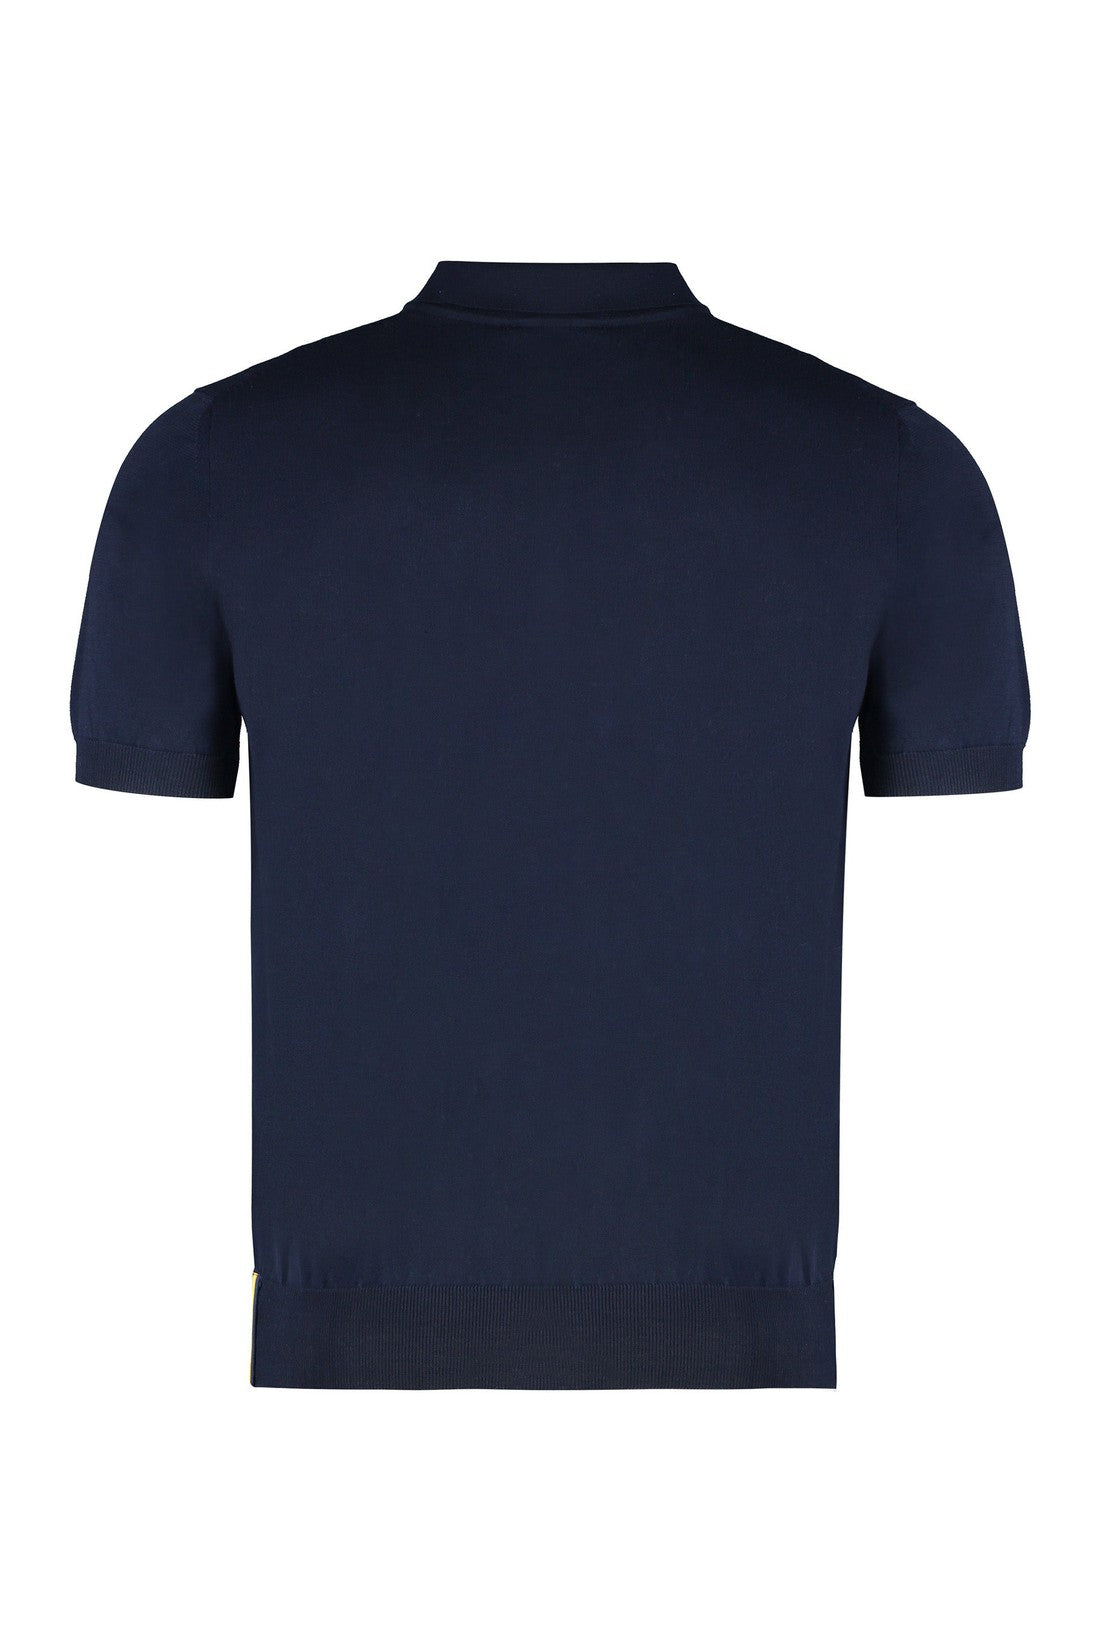 K-Way-OUTLET-SALE-Pleyne knitted cotton polo shirt-ARCHIVIST